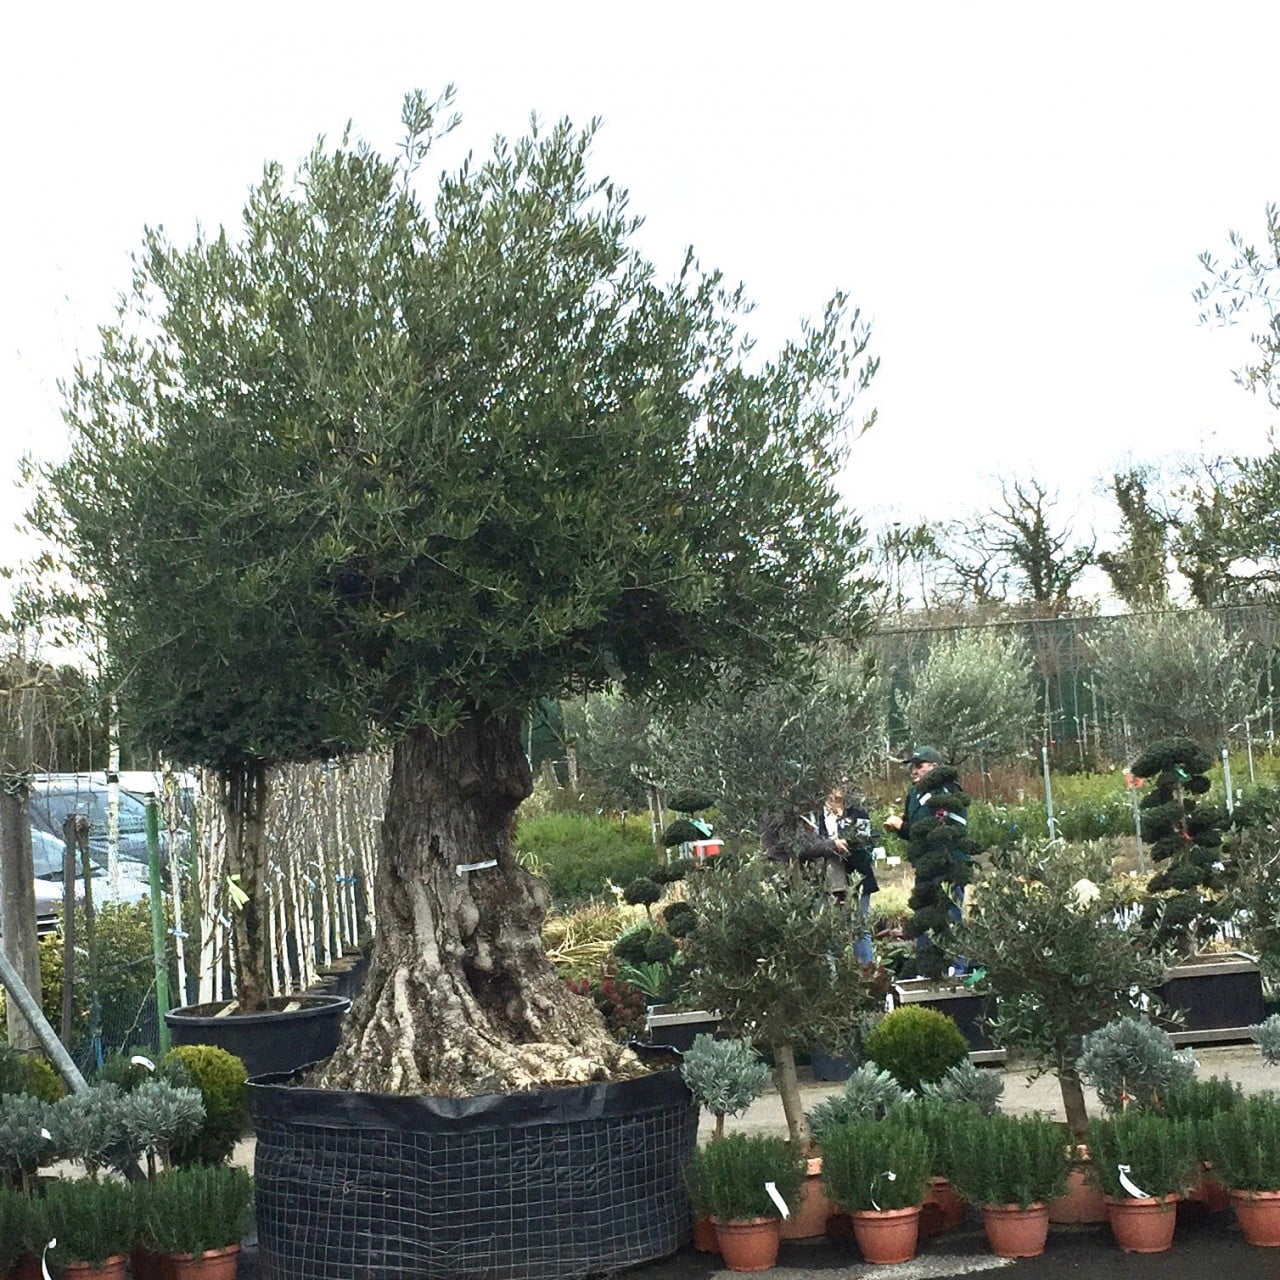 A lovely old olive tree for sale at Europlants on their open day for designers